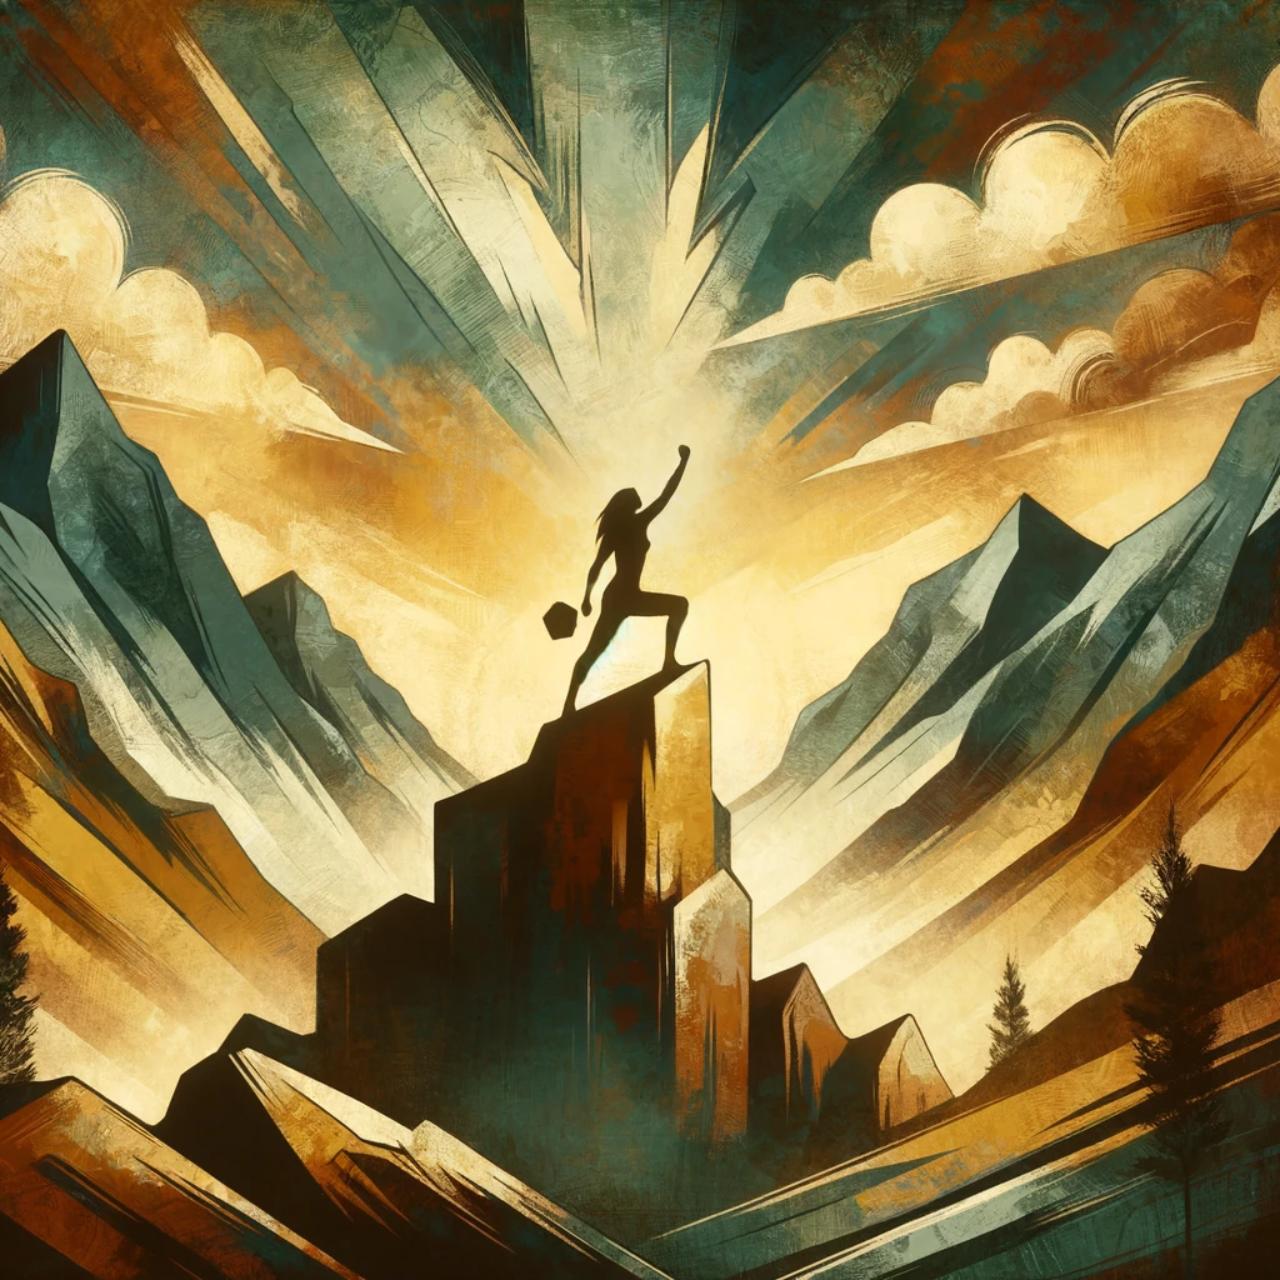 This image depicts a symbolic representation of resilience, such as a figure triumphantly standing on top of a mountain or overcoming a challenging barrier, in natural, earthy tones.